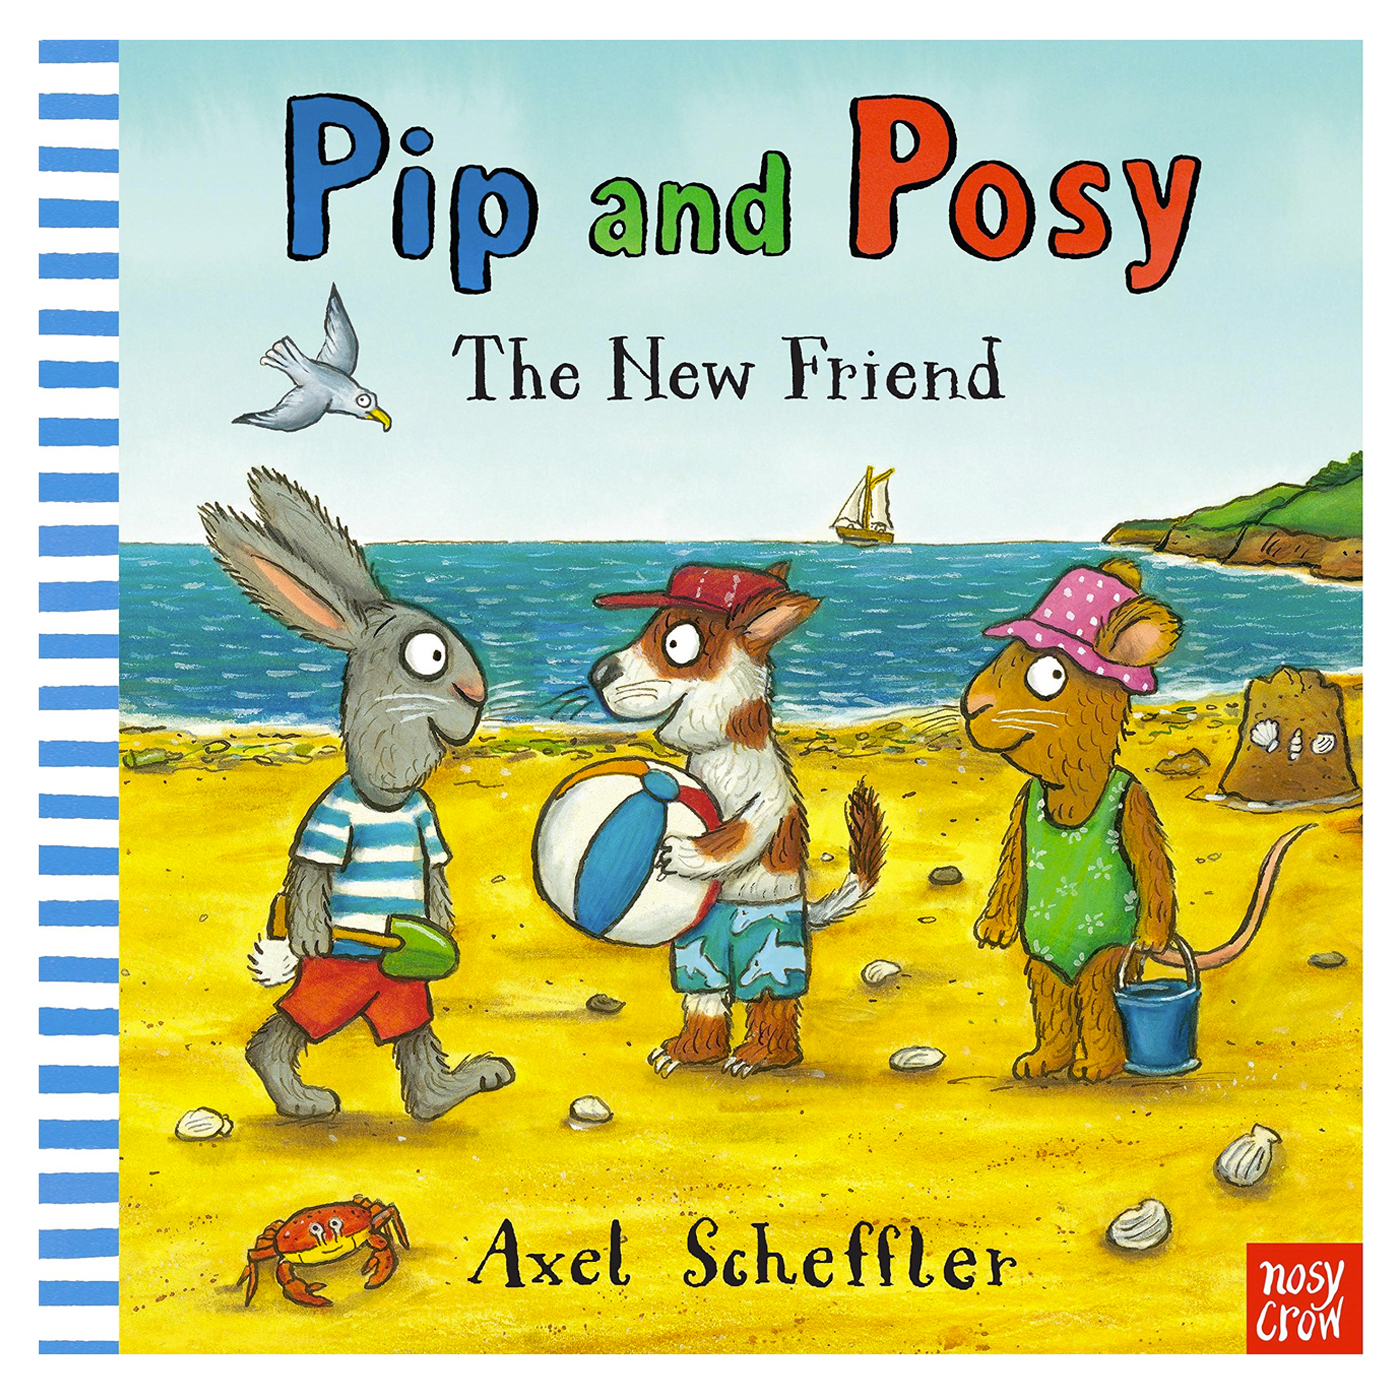  Pip and Posy: The New Friend